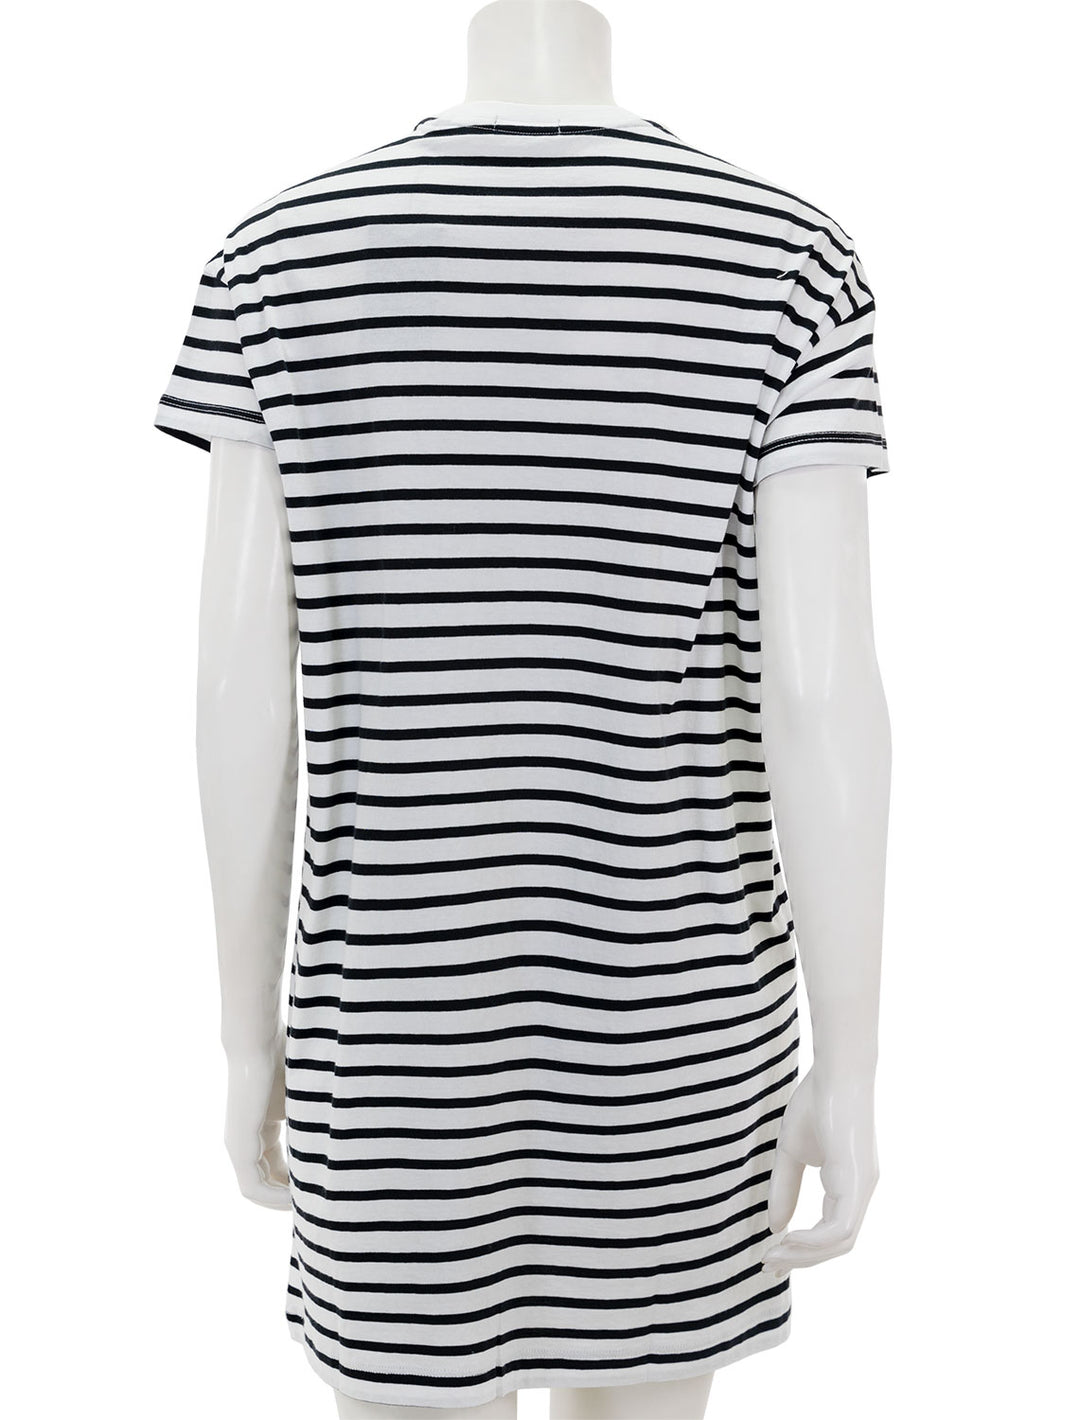 Back view of ATM's Classic Jersey Stripe Short Sleeve Dress in Black and White Stripe.